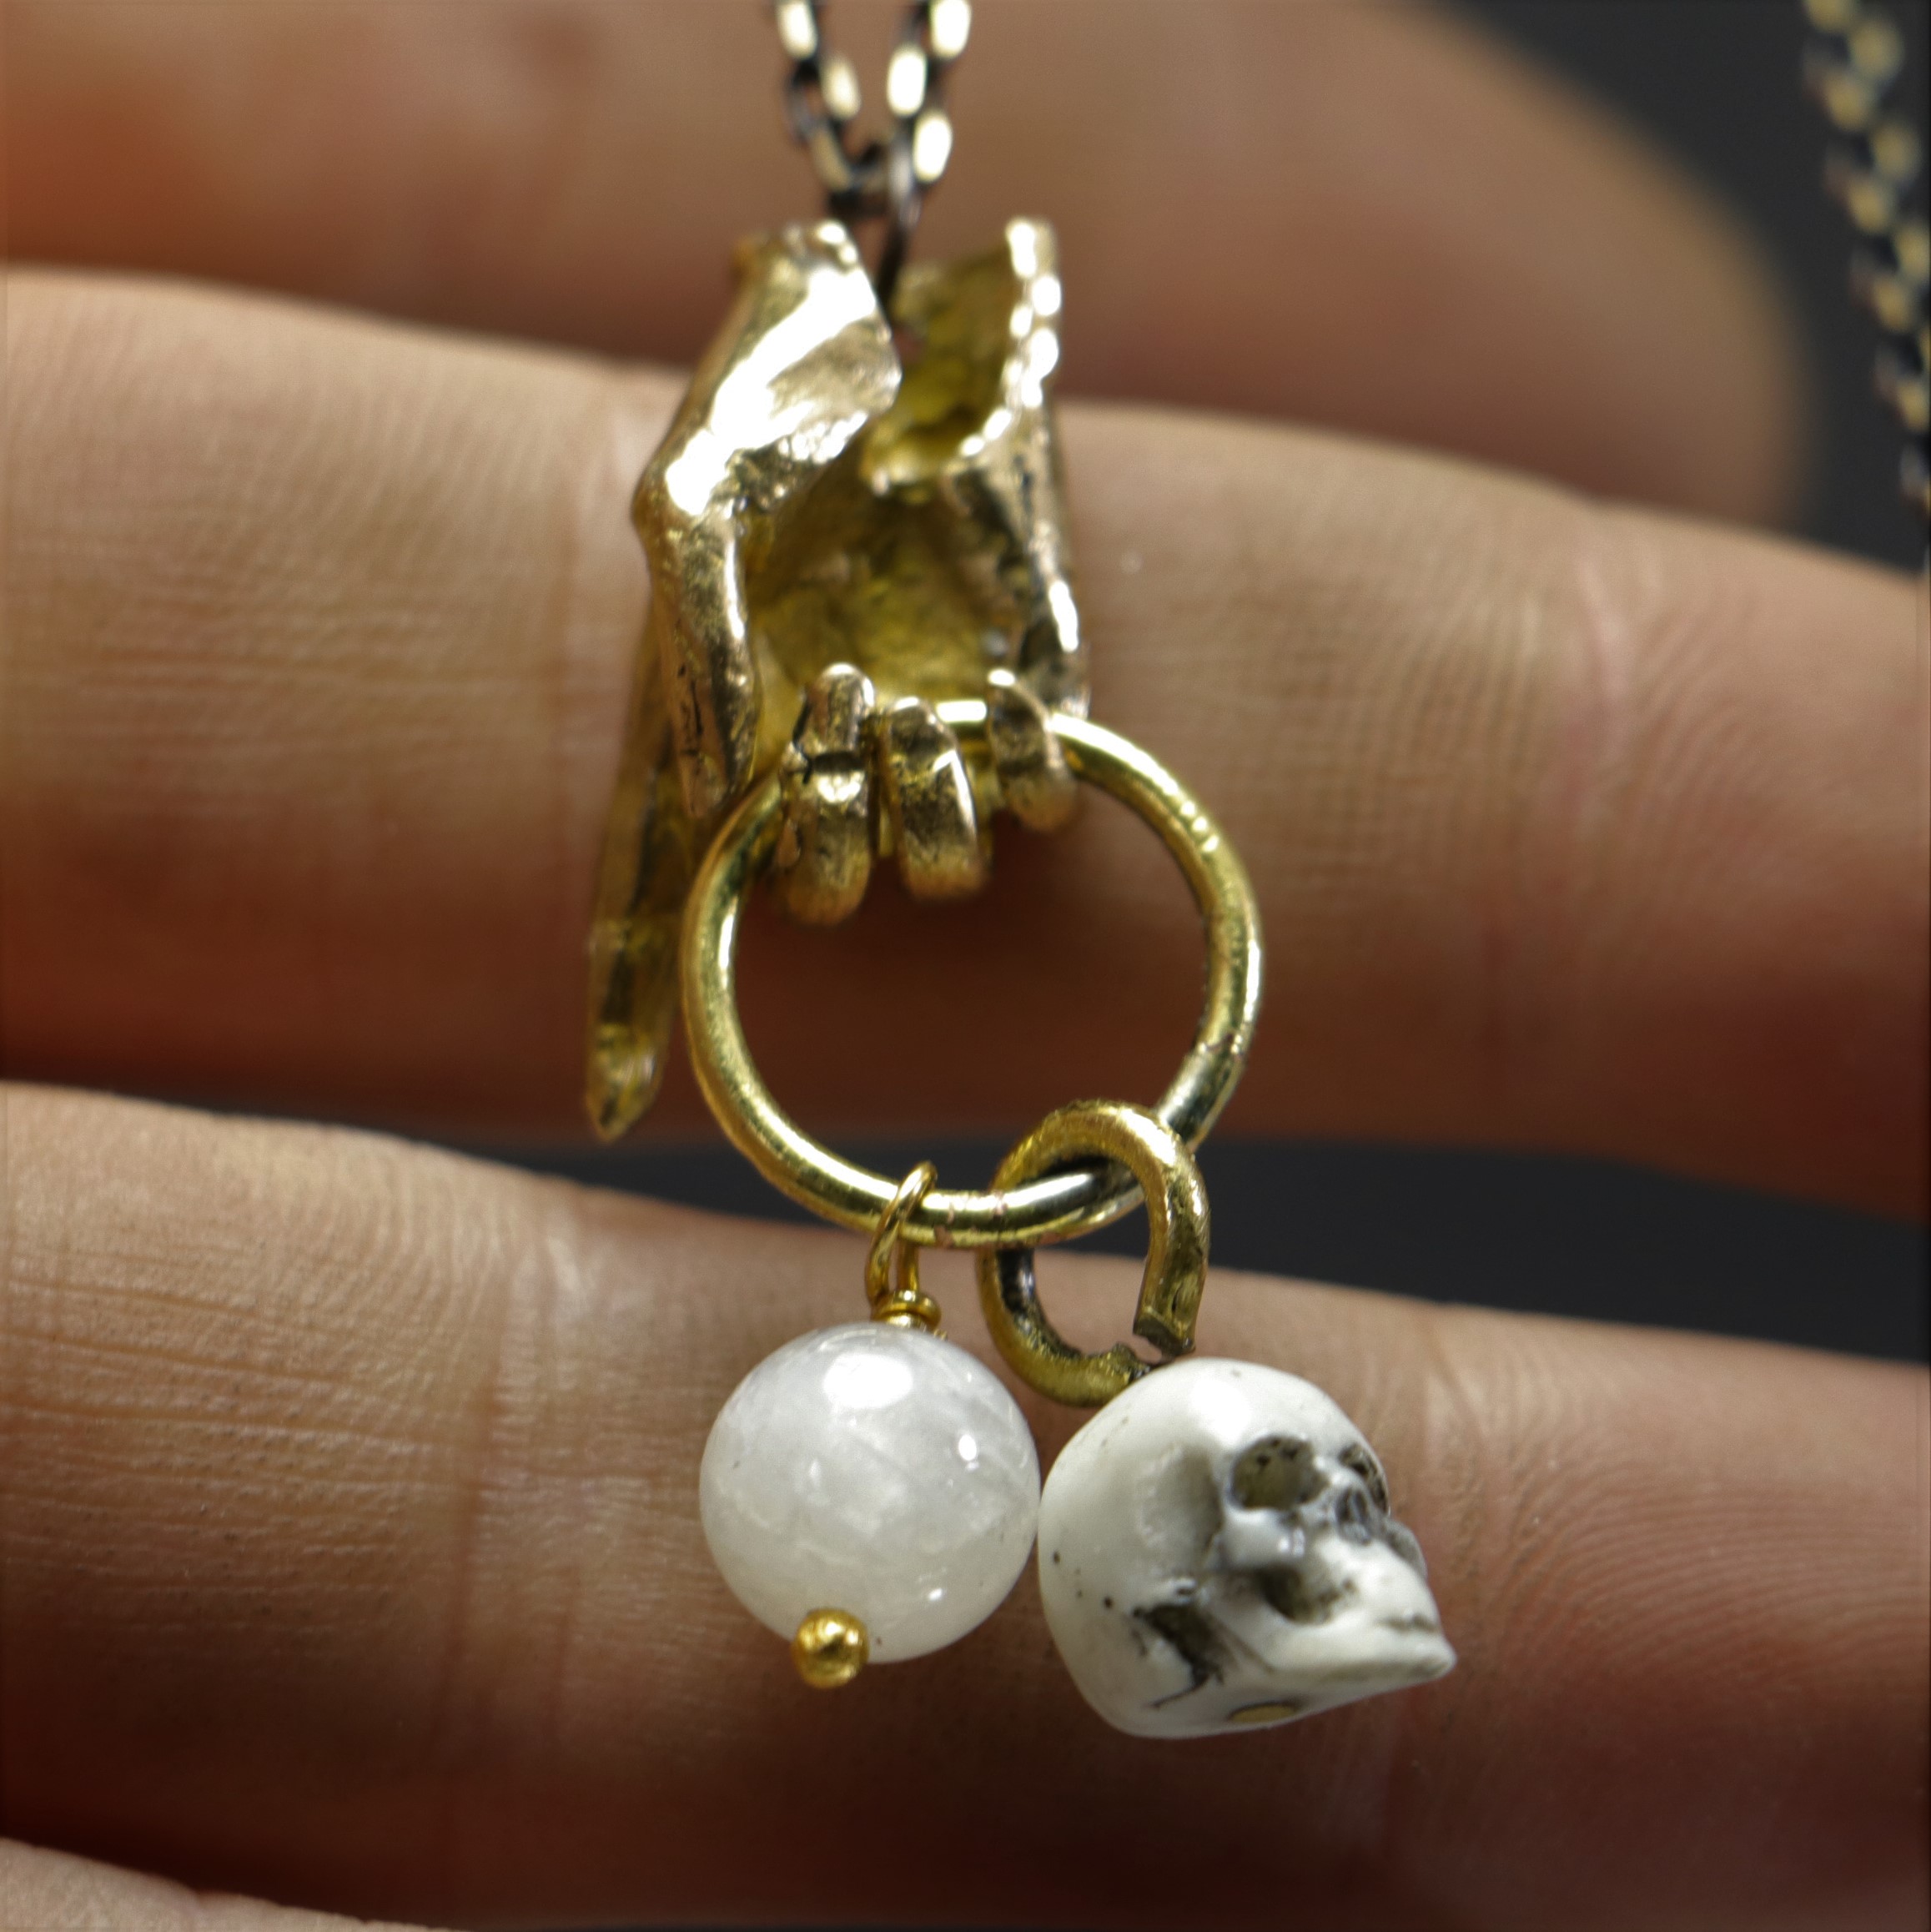 Hand and Skull Moonstone Necklace